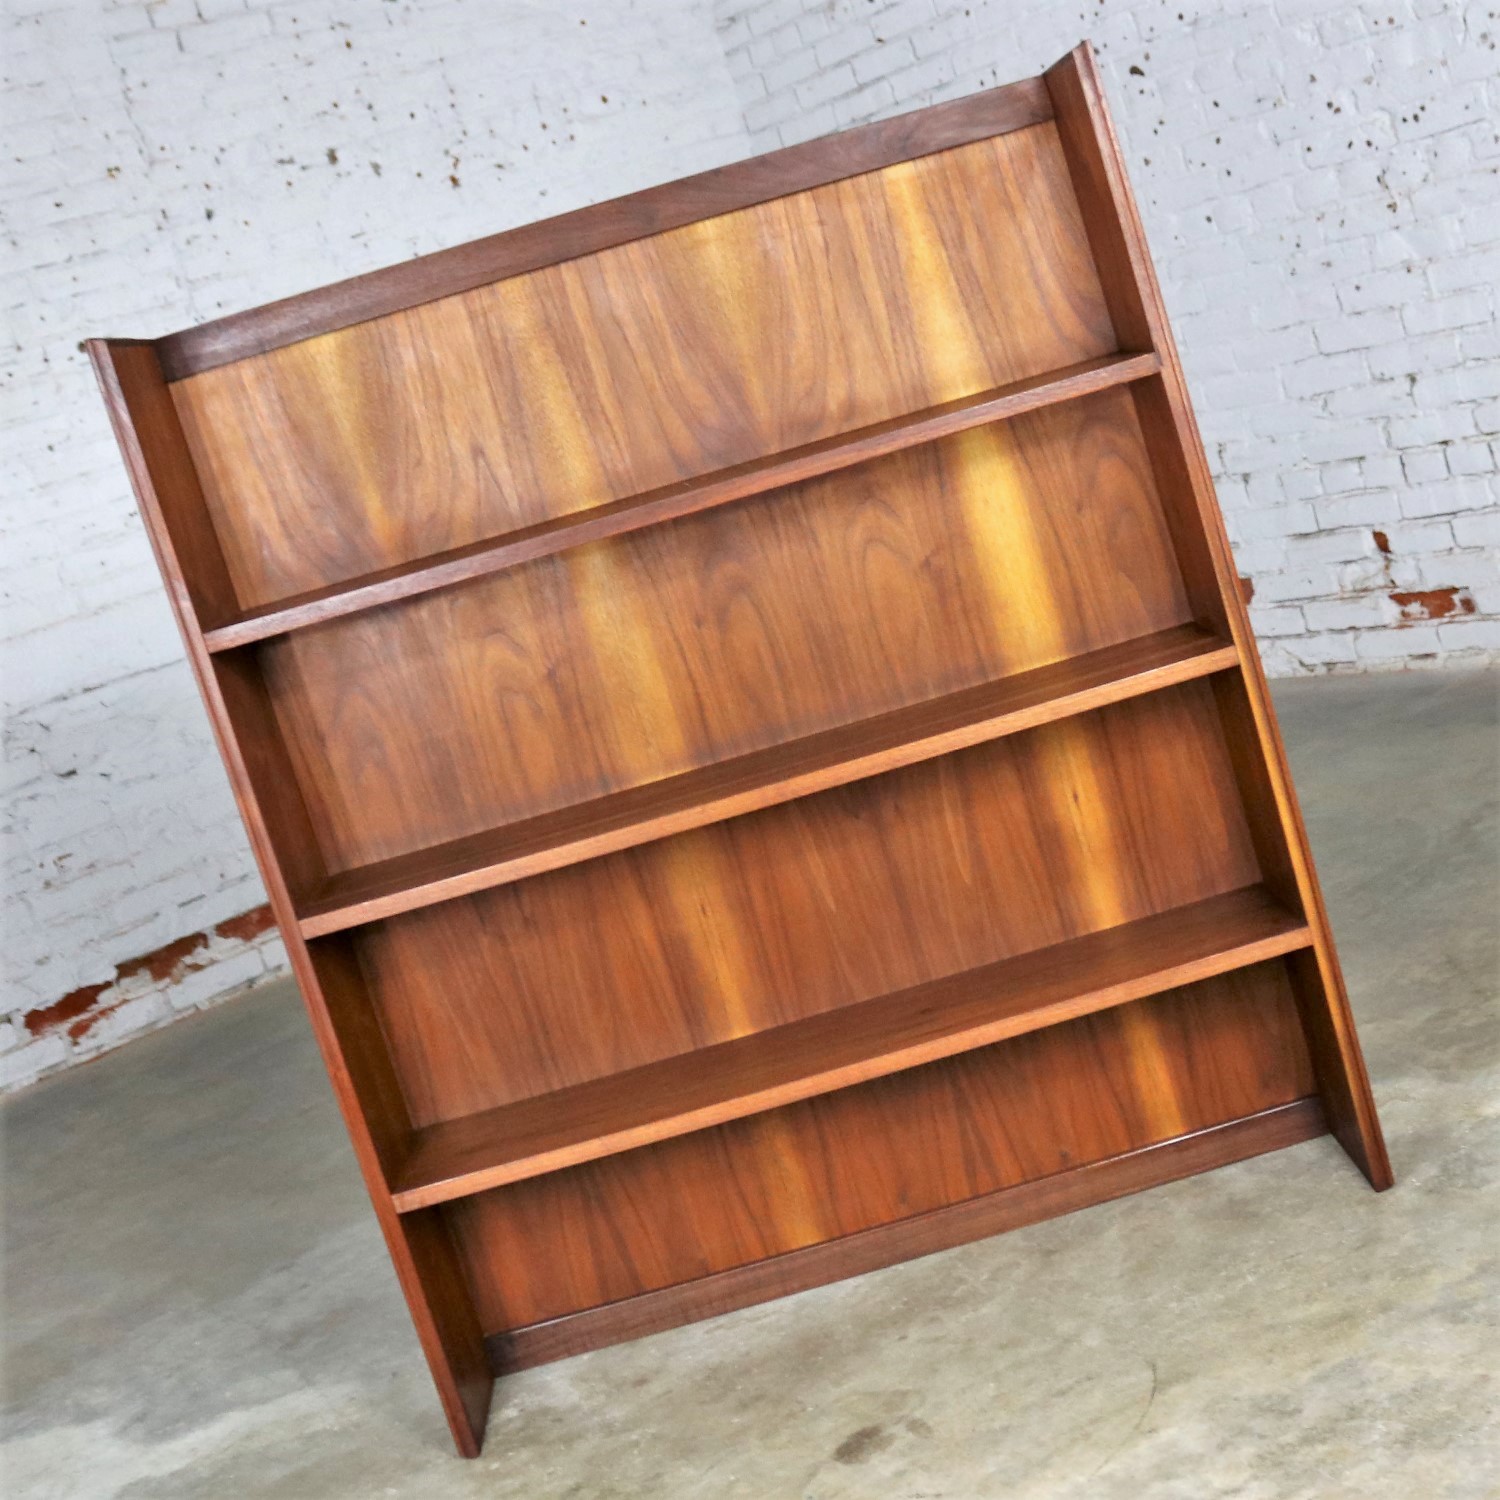 Two Piece Bookcase Display Cabinet Attributed to Founders Furniture Mid Century Modern